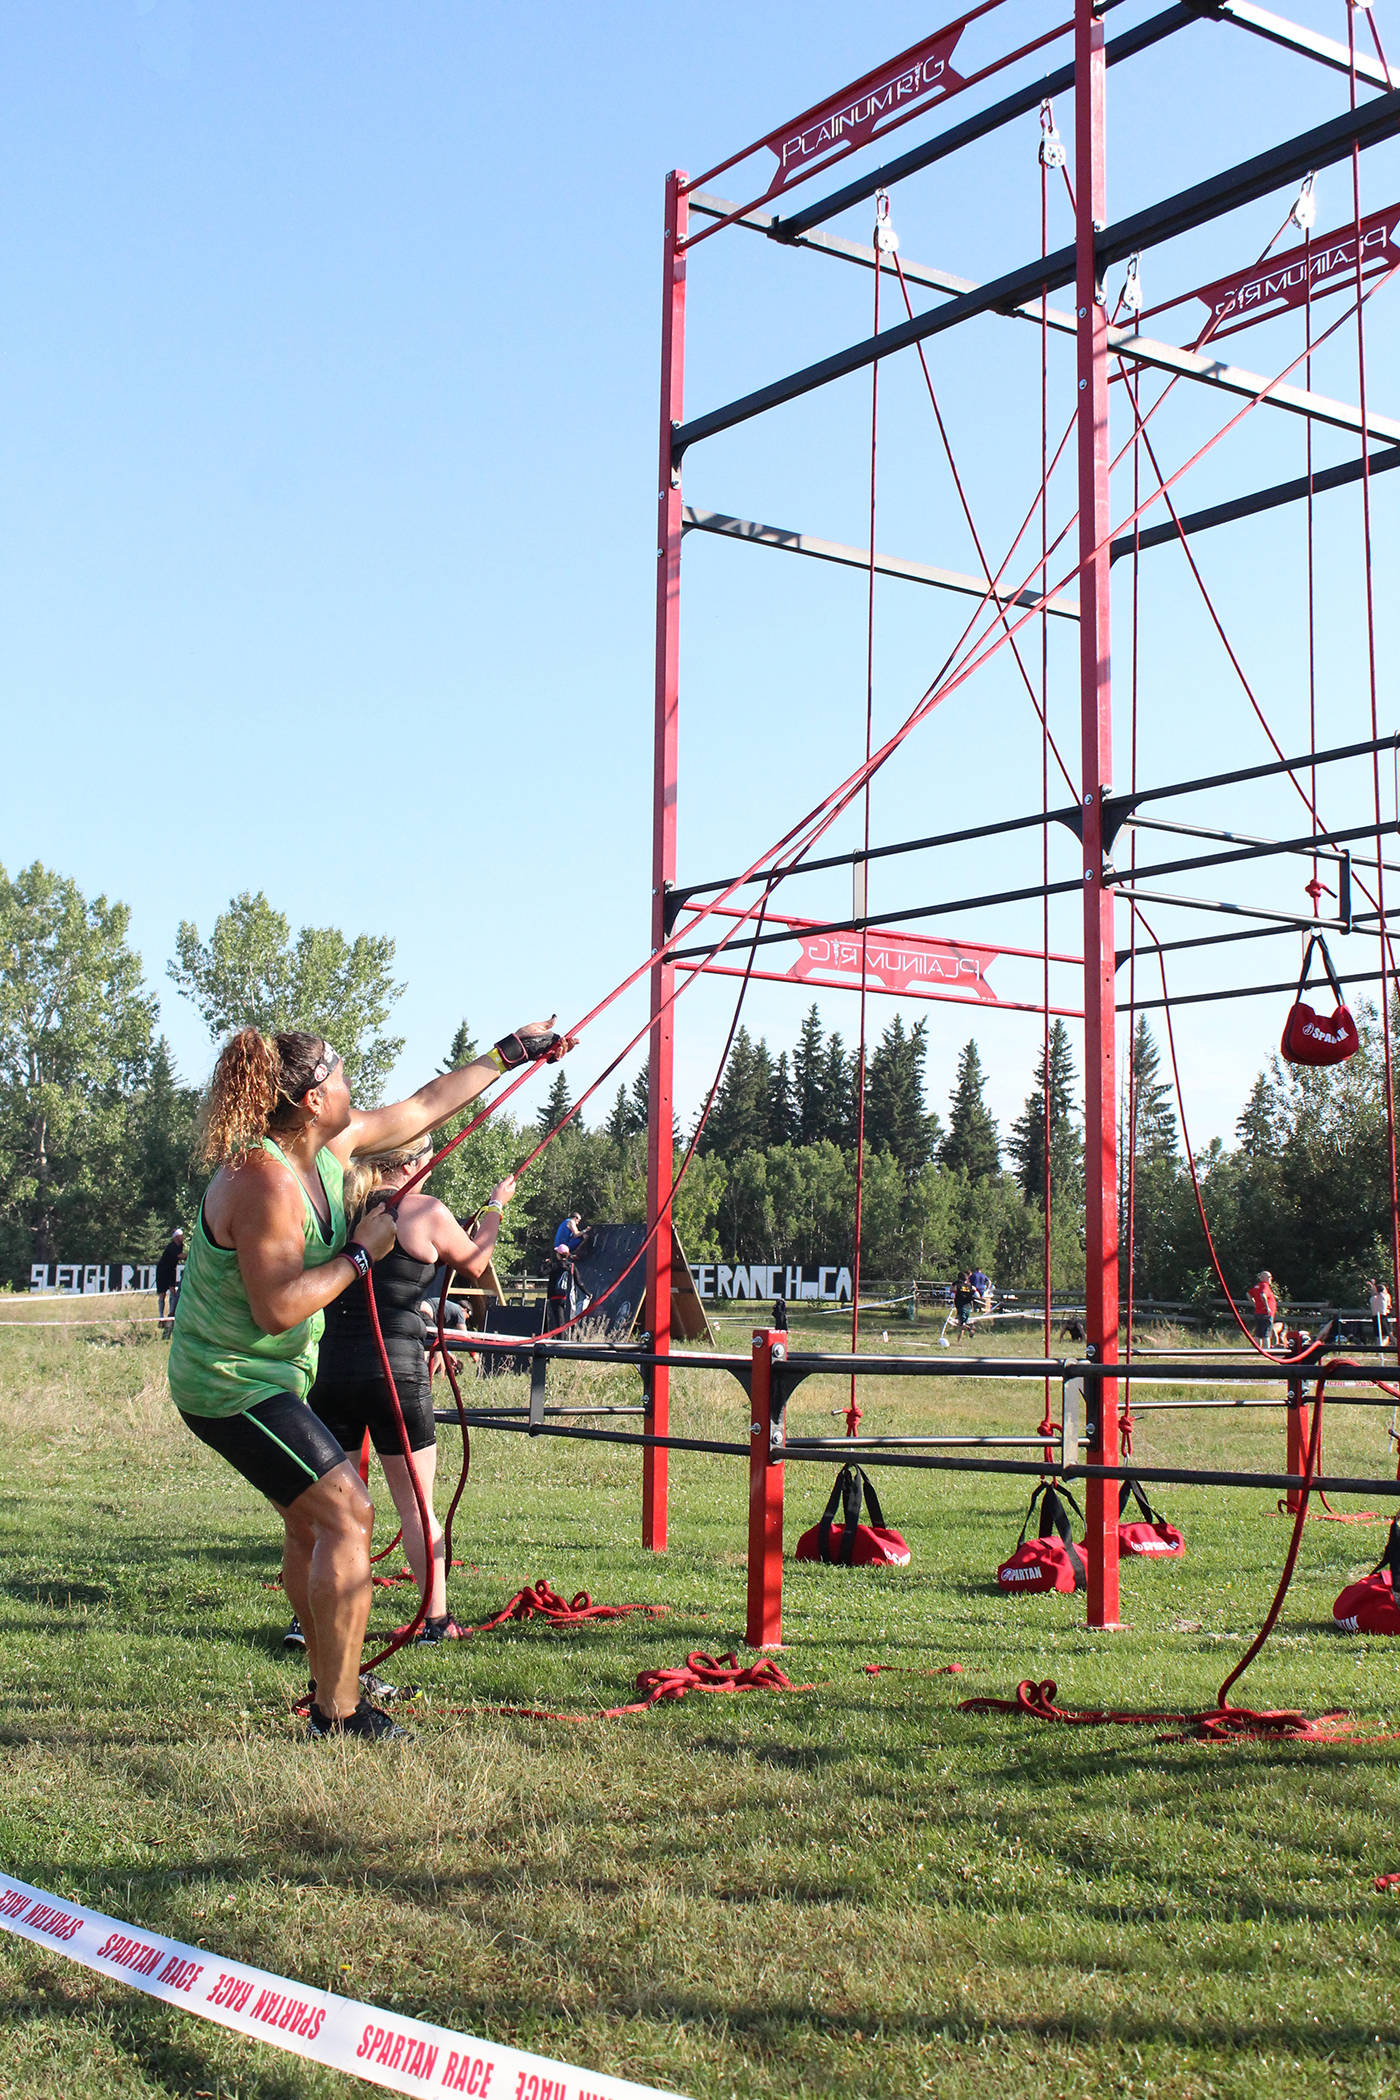 Video: Thousands challenge themselves in this year’s Spartan Race